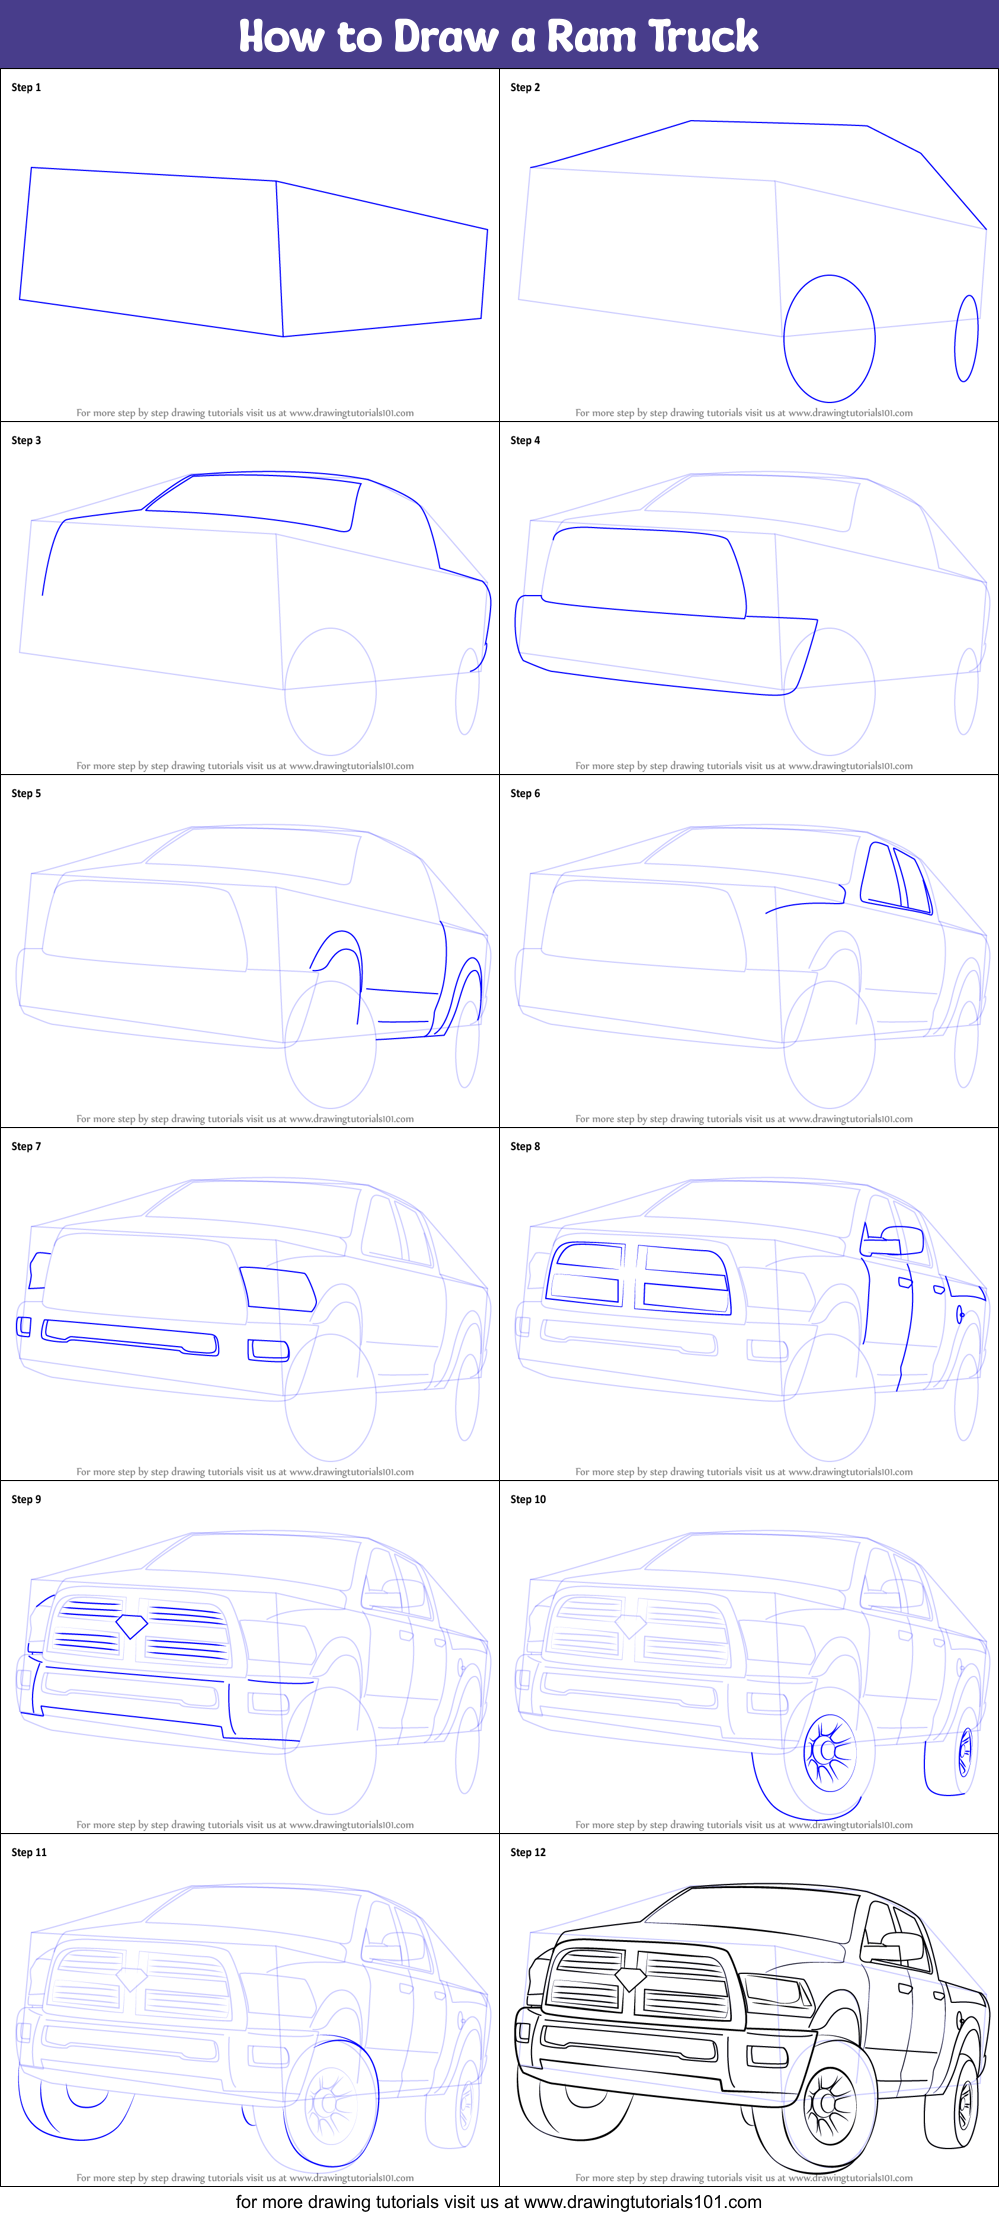 How to Draw a Ram Truck printable step by step drawing sheet